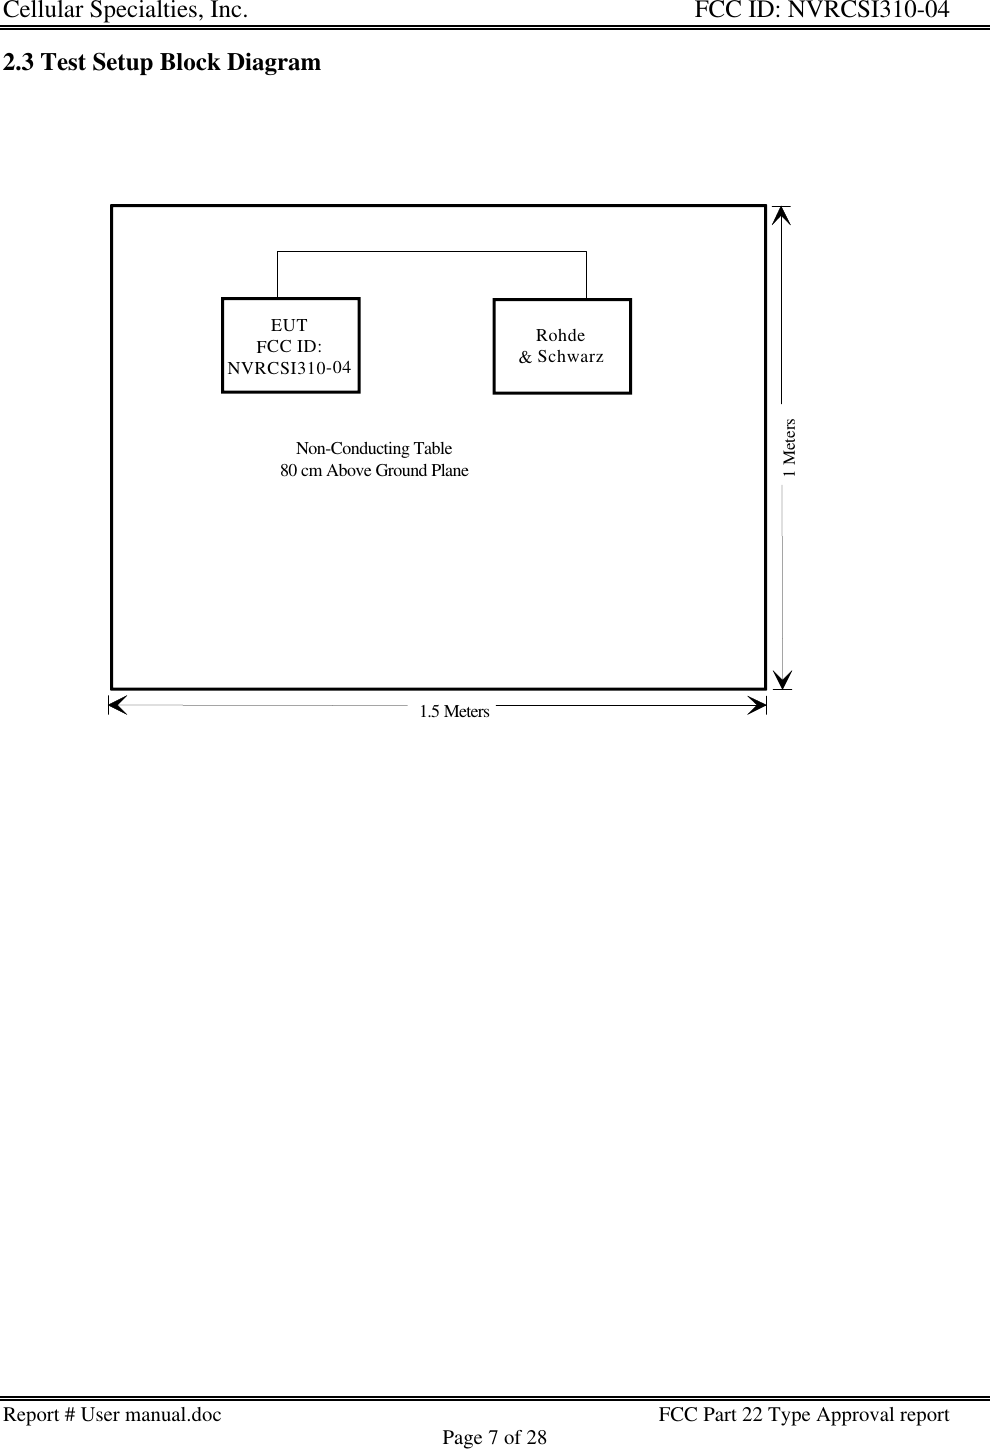 Cellular Specialties, Inc. FCC ID: NVRCSI310-04Report # User manual.doc FCC Part 22 Type Approval reportPage 7 of 282.3 Test Setup Block Diagram1.5 MetersNon-Conducting Table80 cm Above Ground Plane1 MetersEUTFCC ID:NVRCSI310-04Rohde &amp; Schwarz